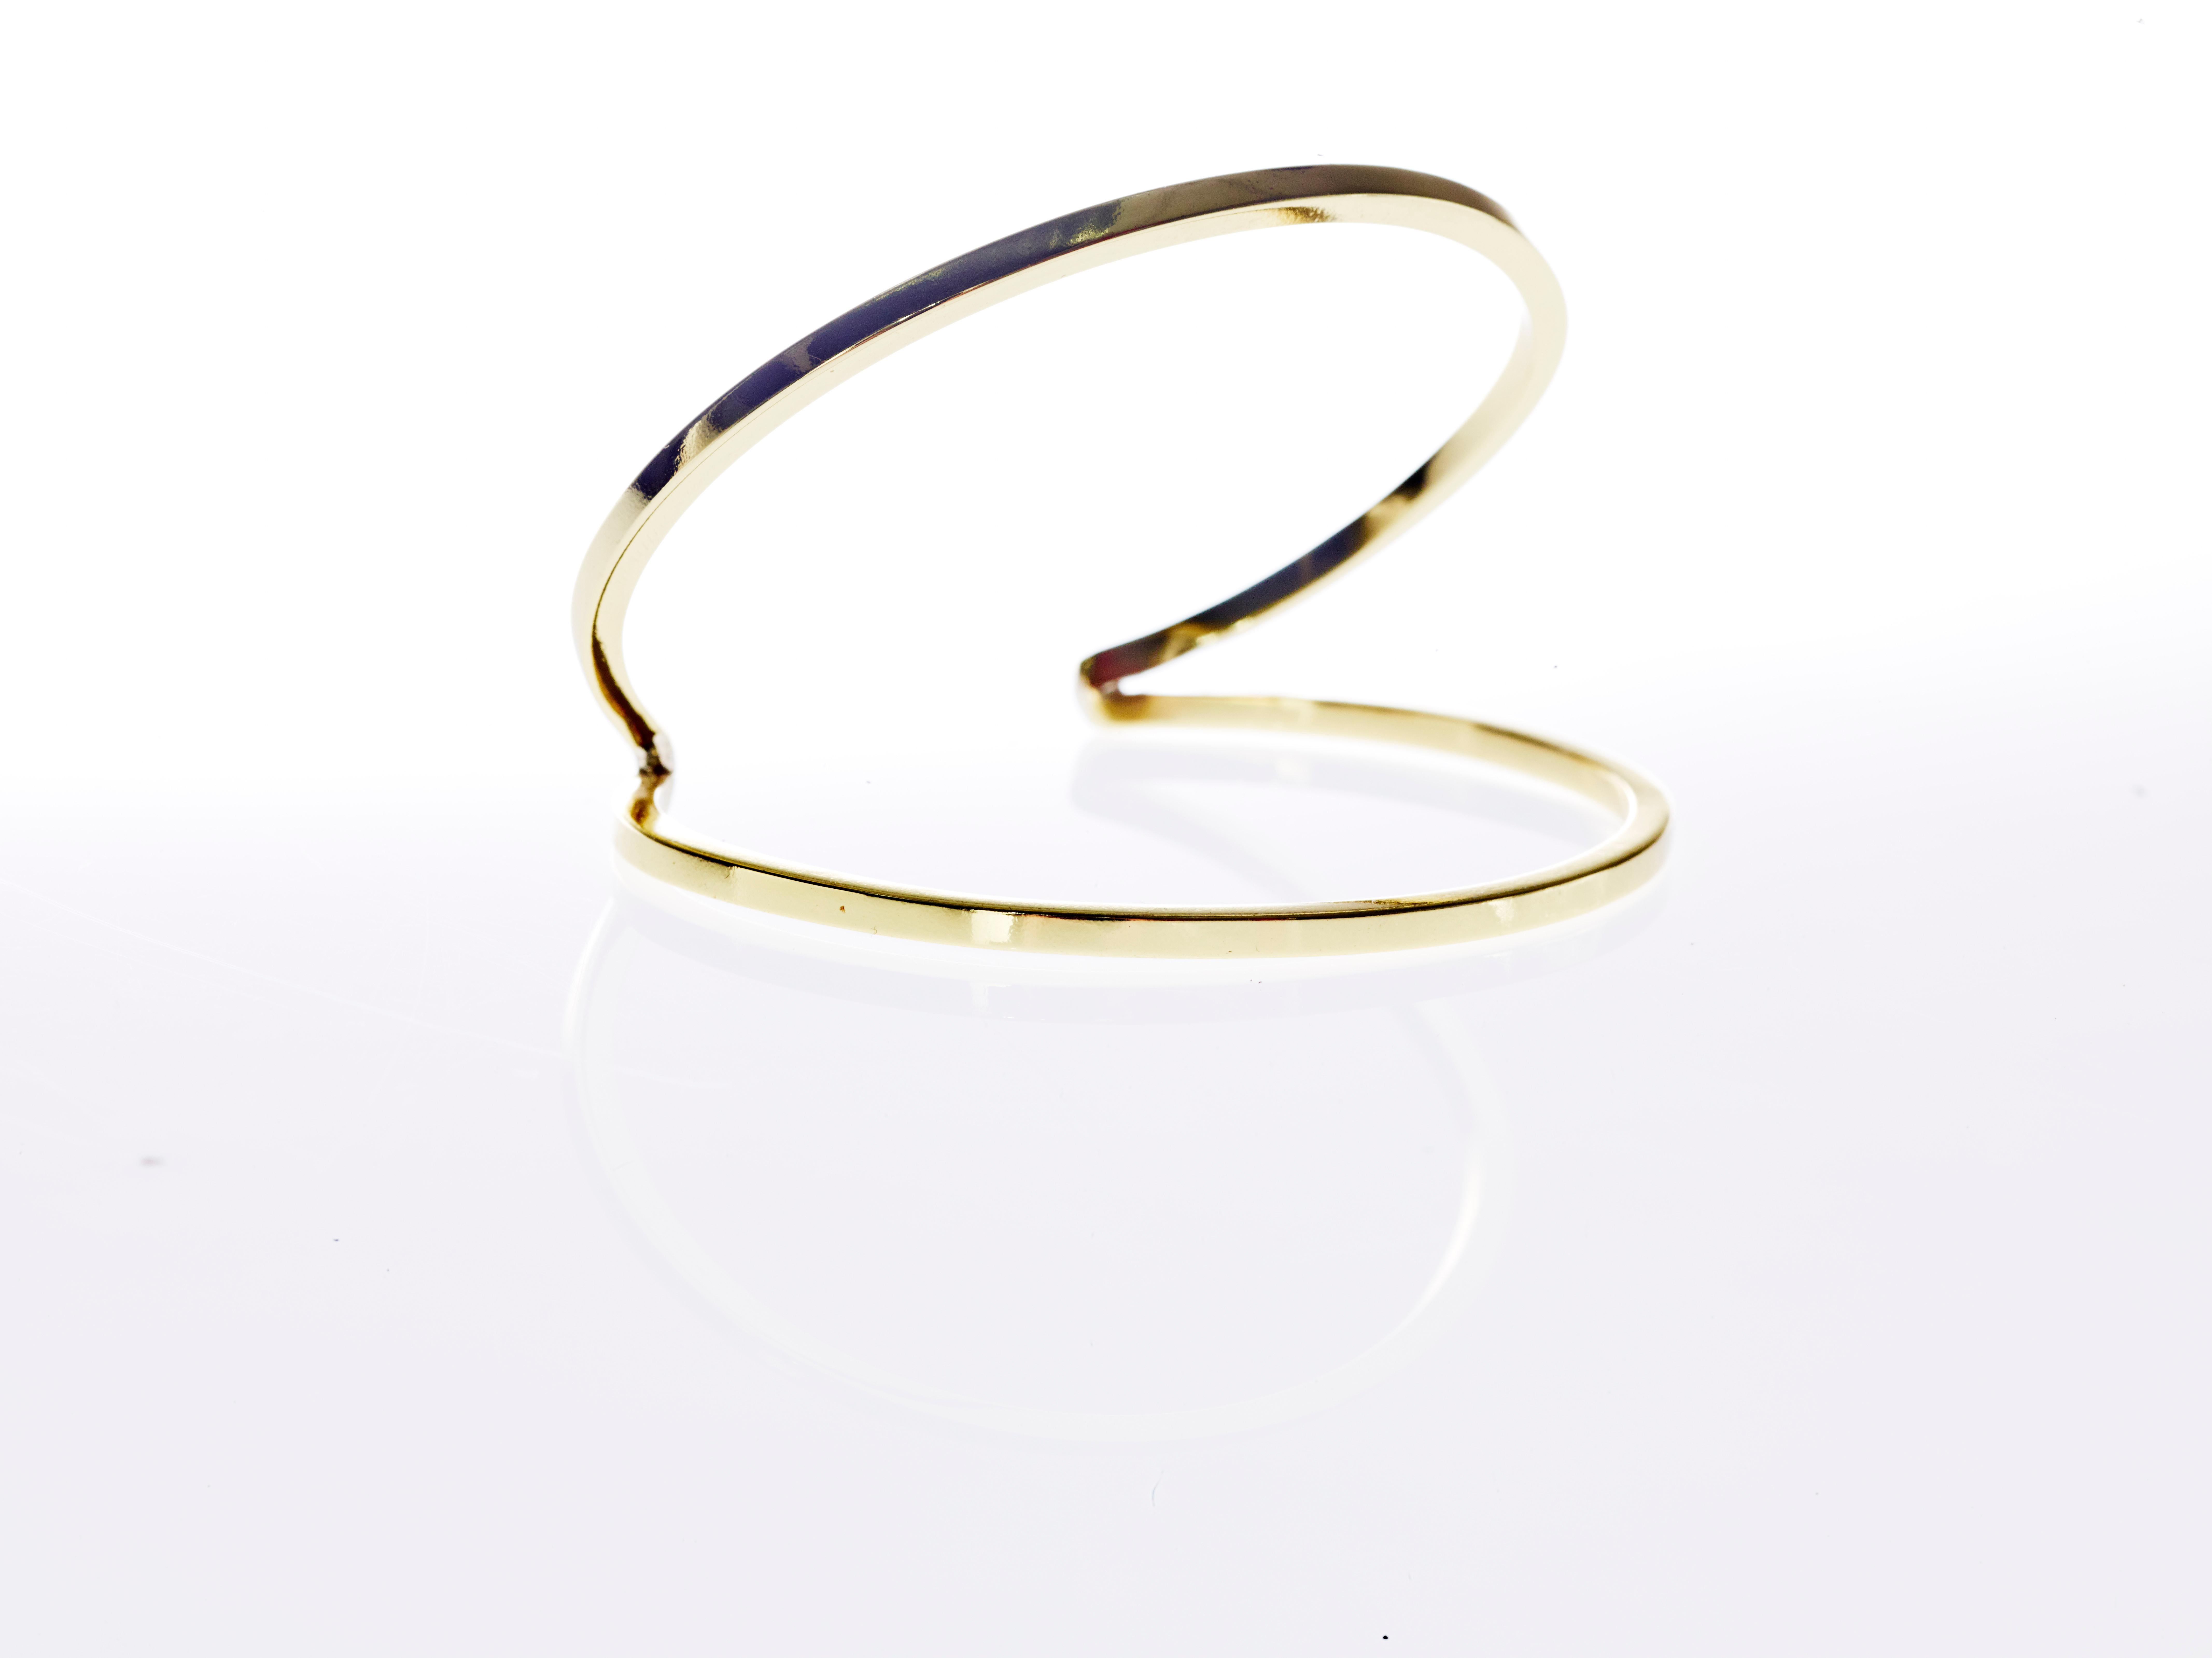 Bangle Cuff Bracelet 10k Gold Plated Statement piece J Dauphin

Hand made in Los Angeles

Made to Order 3 Weeks to be completed


